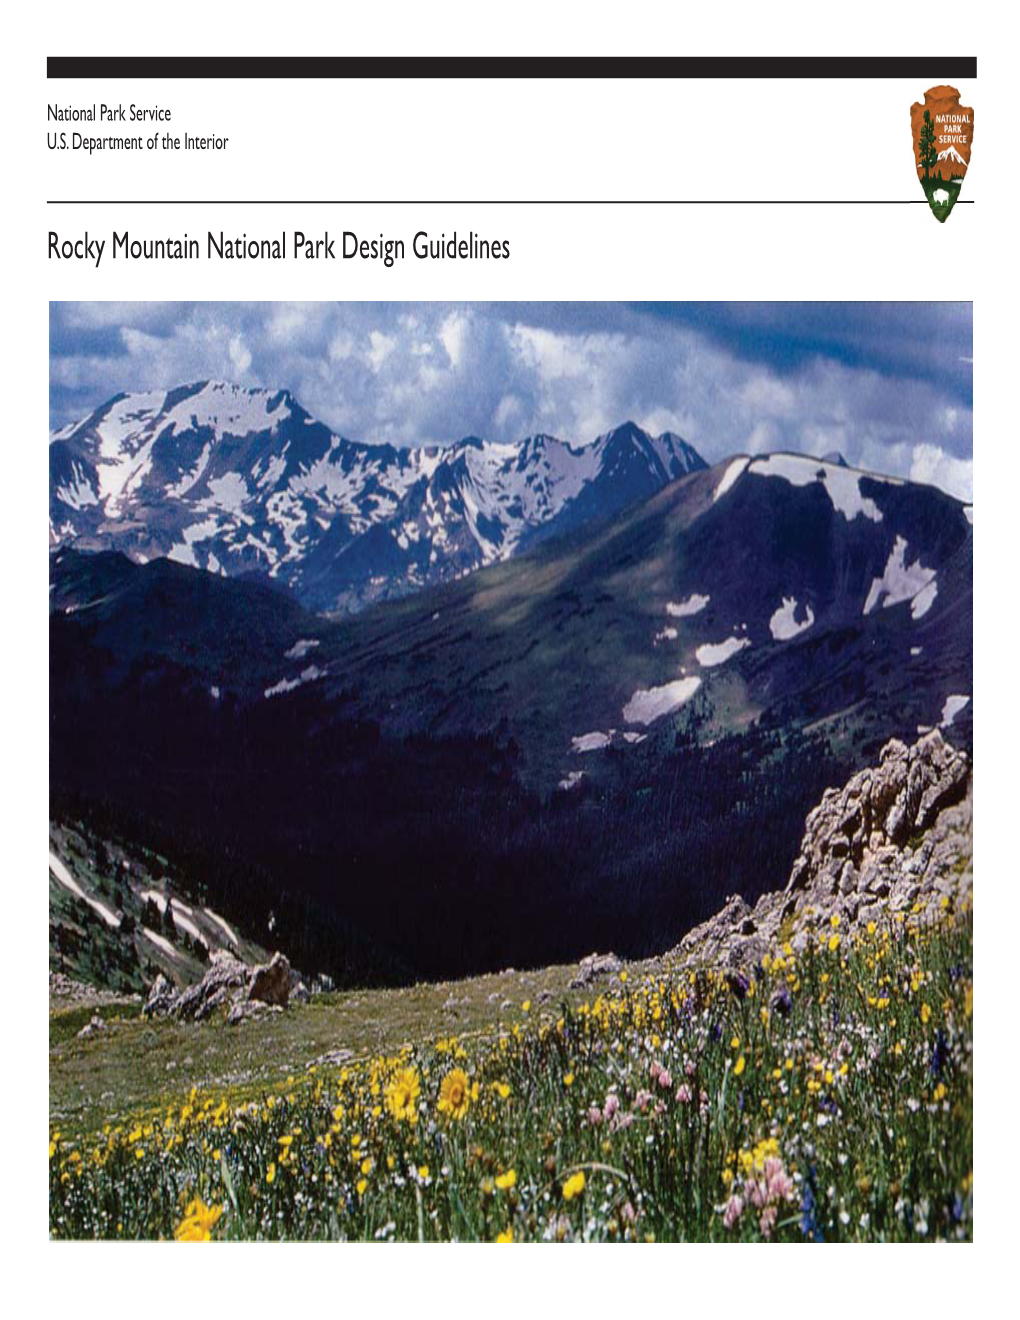 Rocky Mountain National Park Design Guidelines PURPOSE